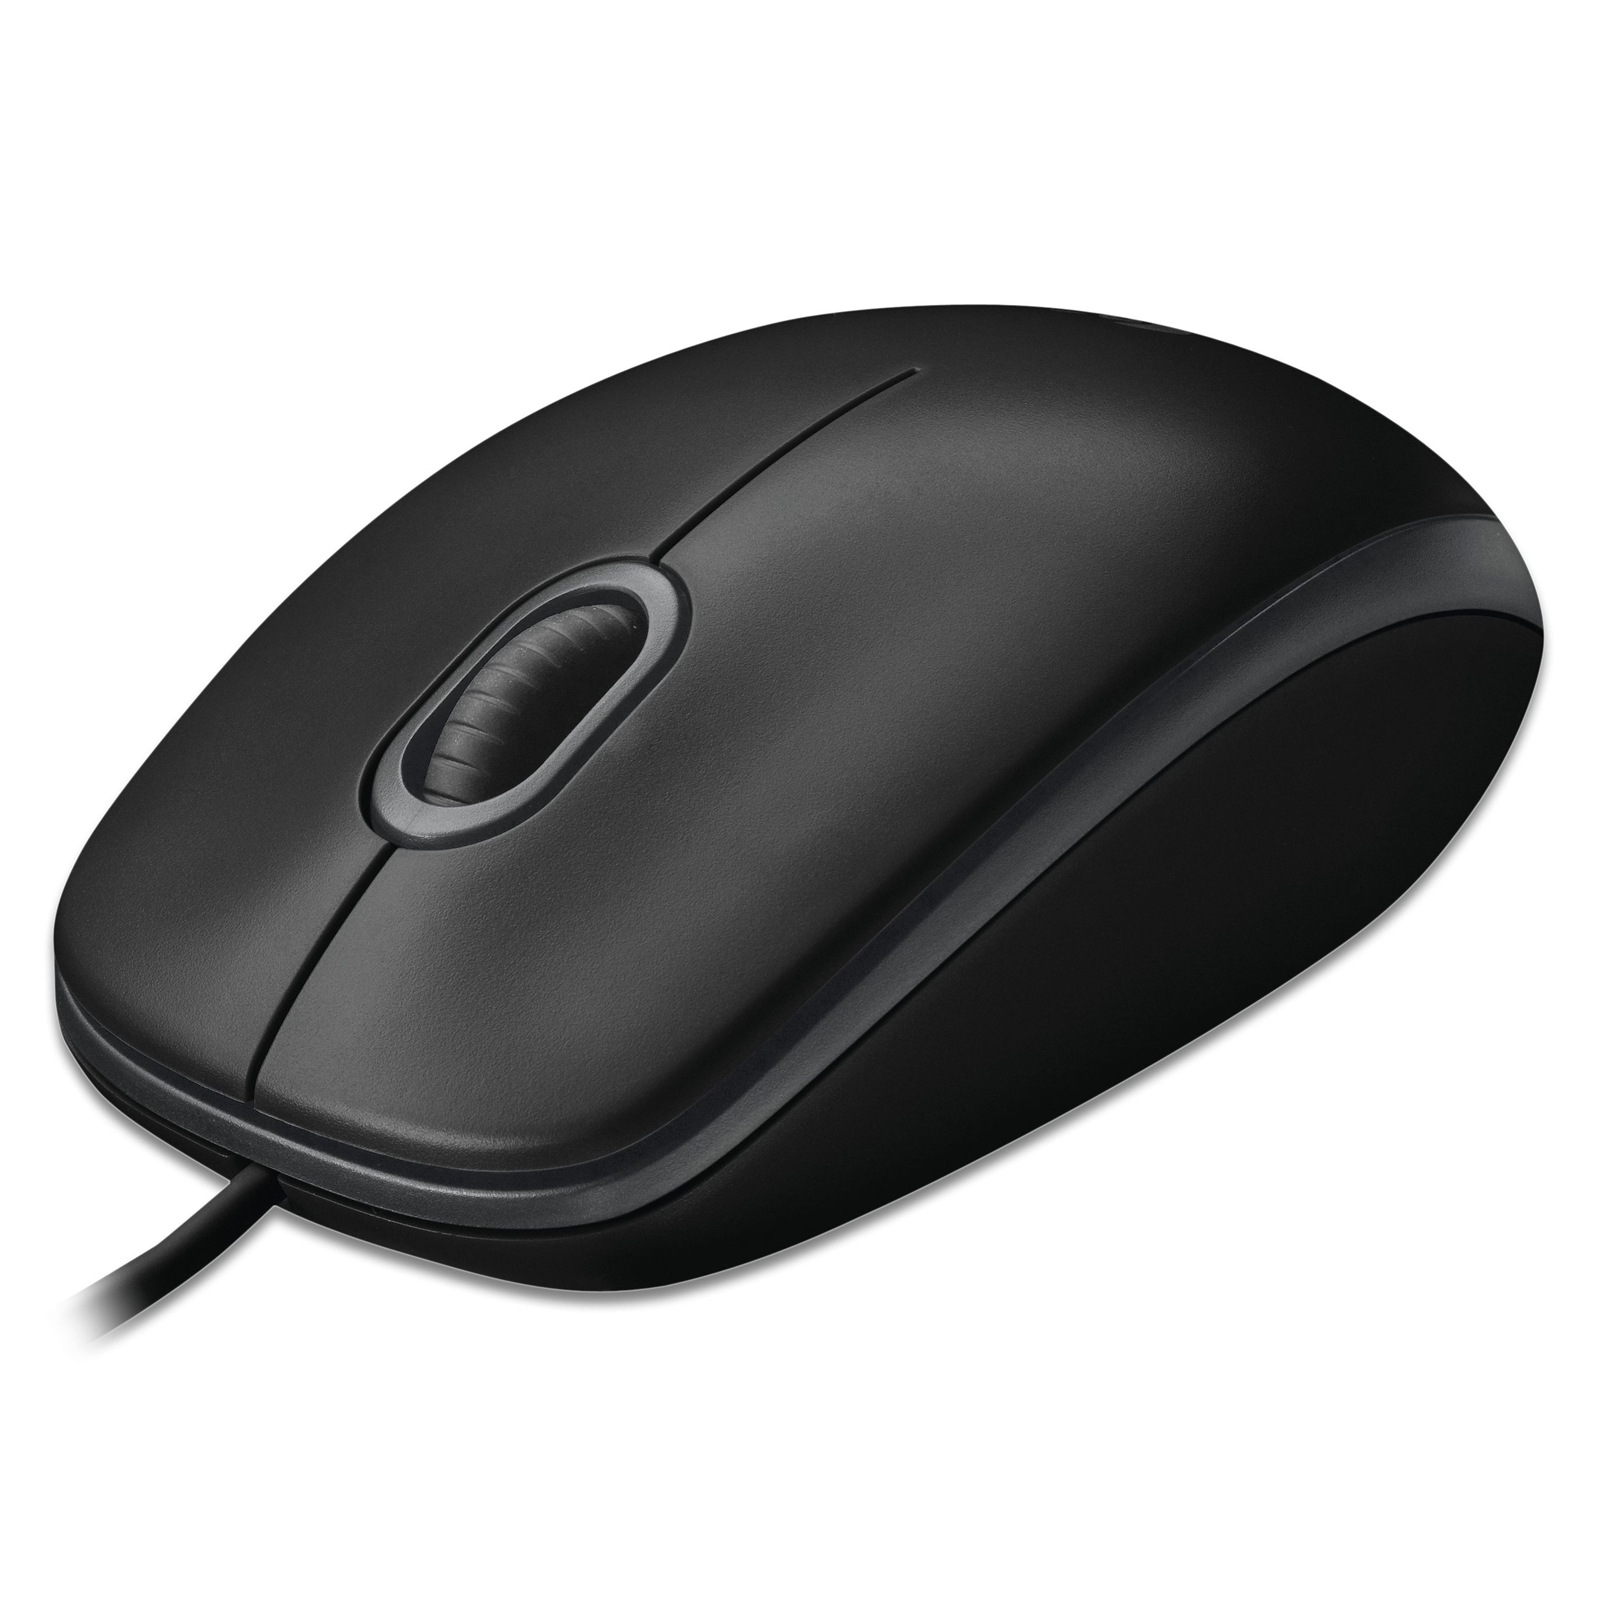 Logitech B100 Wired USB Mouse, 3-Buttons, 1000dpi and Optical Tracking, Ambidextrous Design for PC, Mac and Laptop, Black